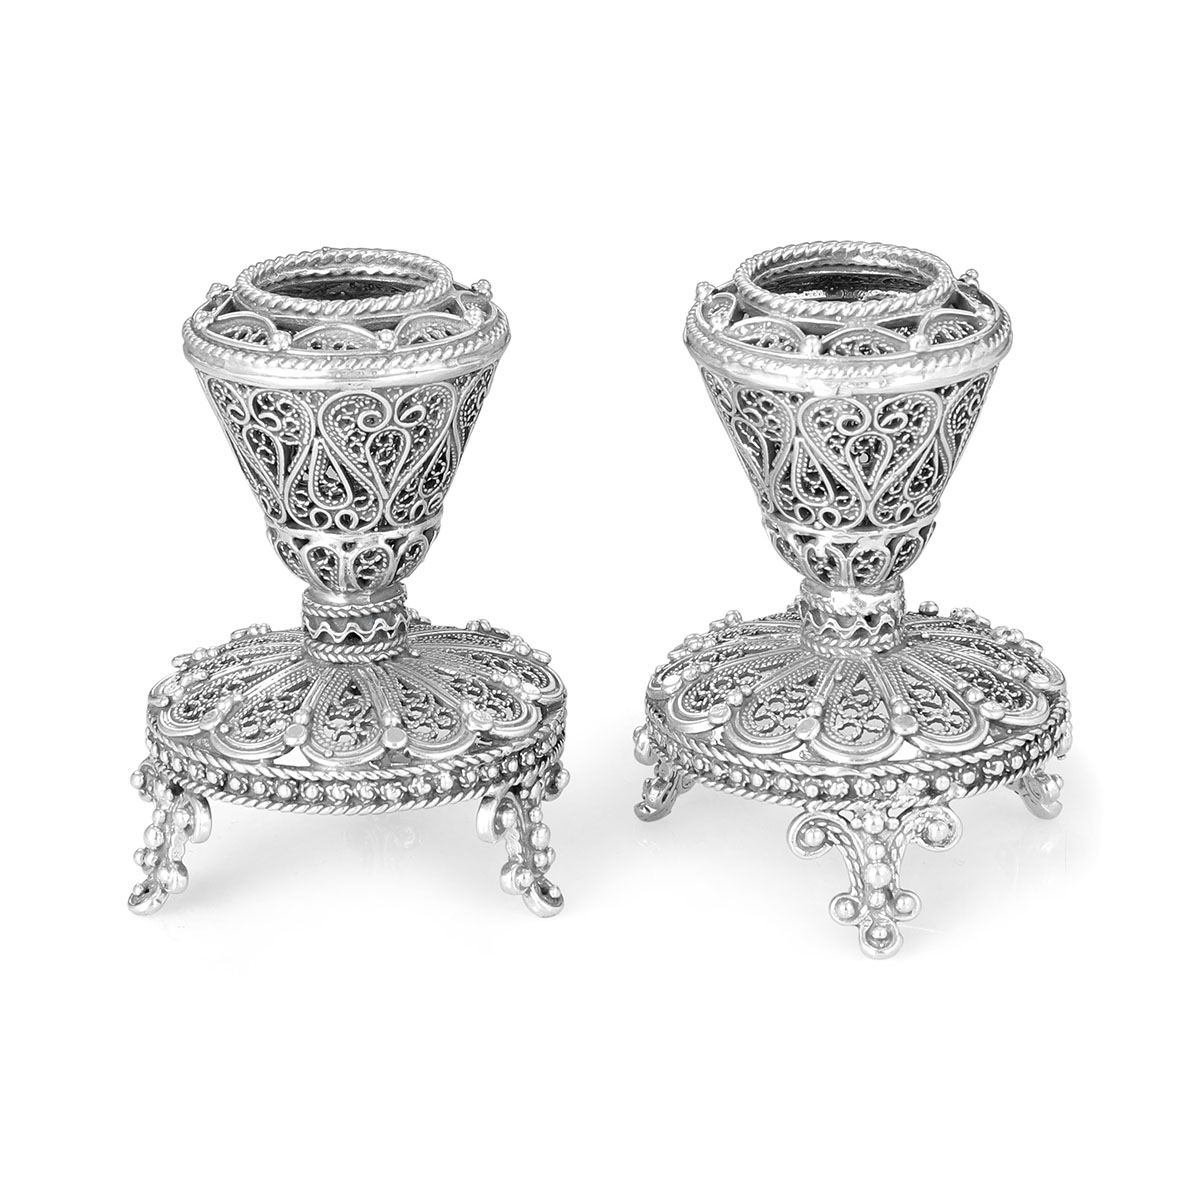 Traditional Yemenite Art Chic Handcrafted Sterling Silver Shabbat Candlesticks With Filigree Design - 1